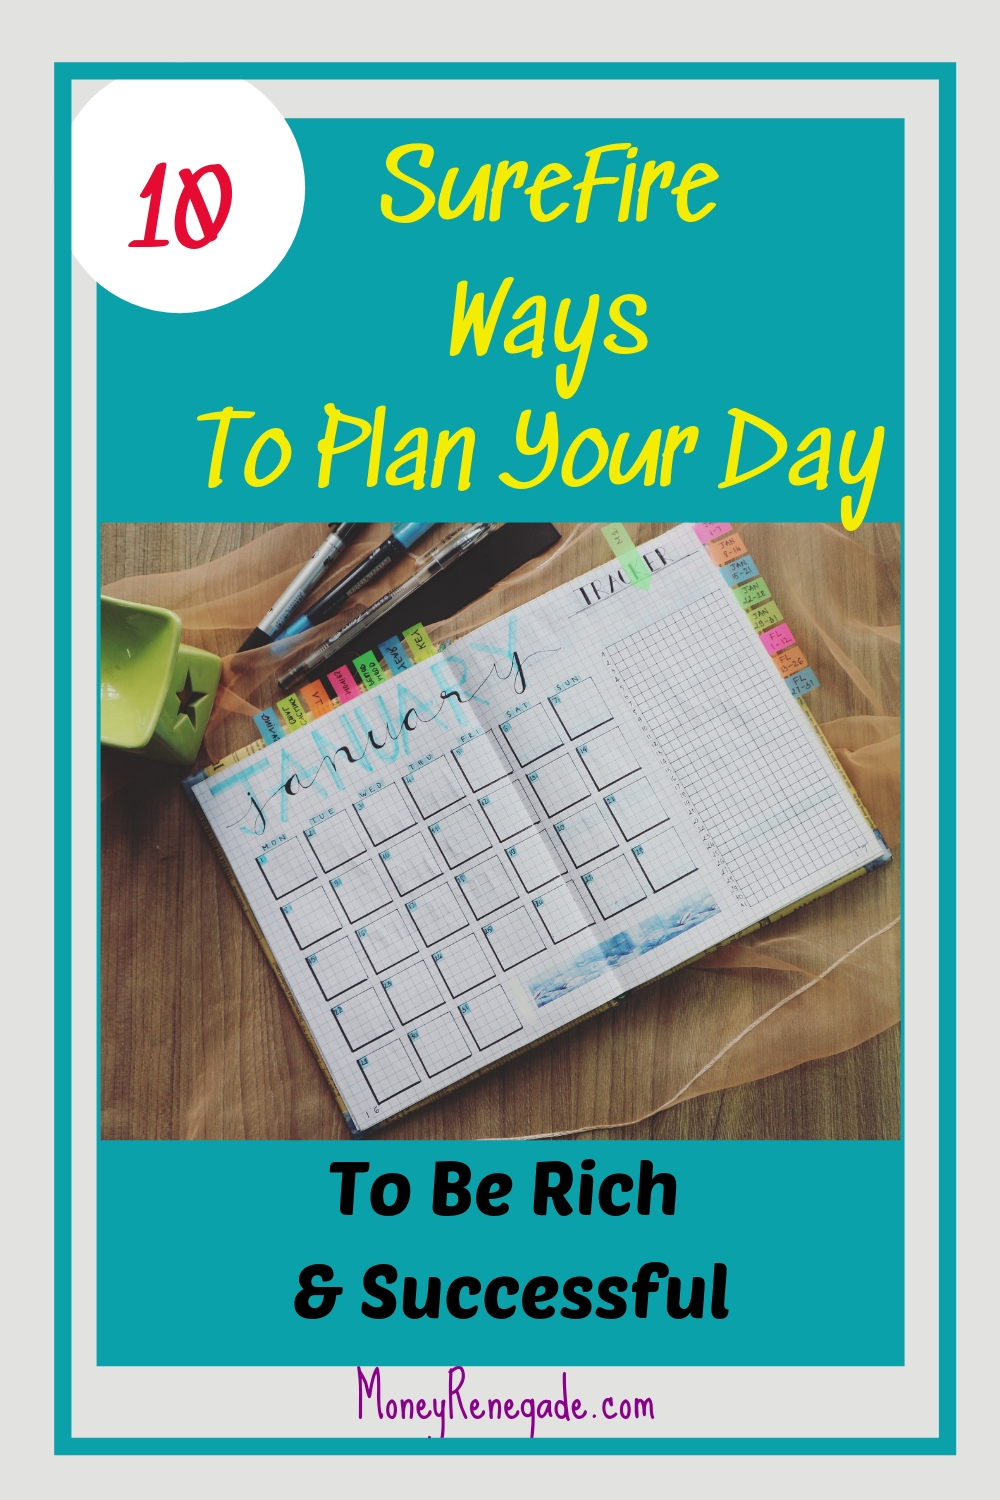 Plan your day like the rich